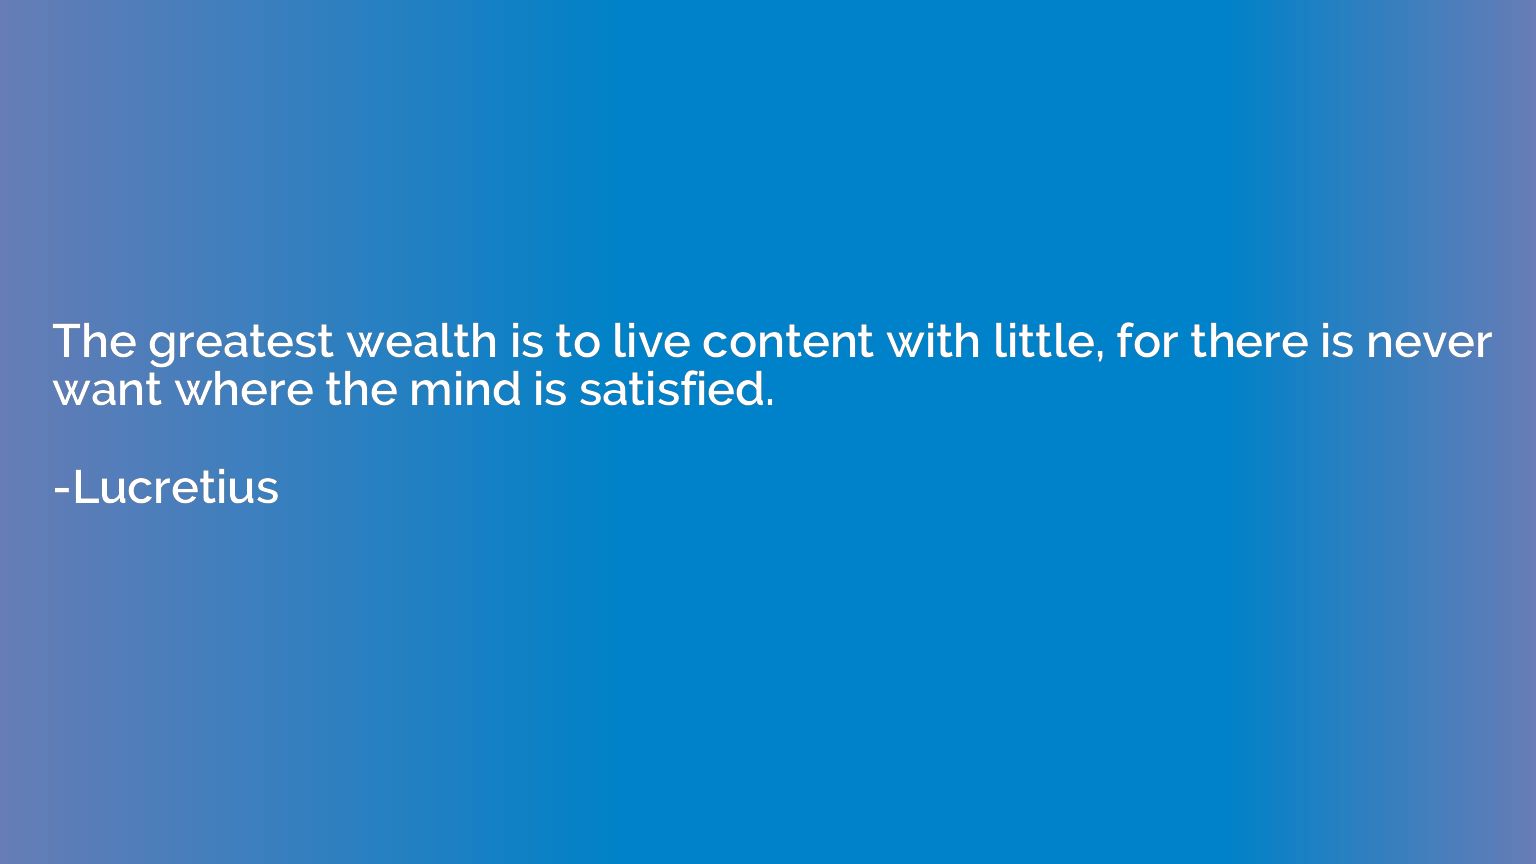 The greatest wealth is to live content with little, for ther